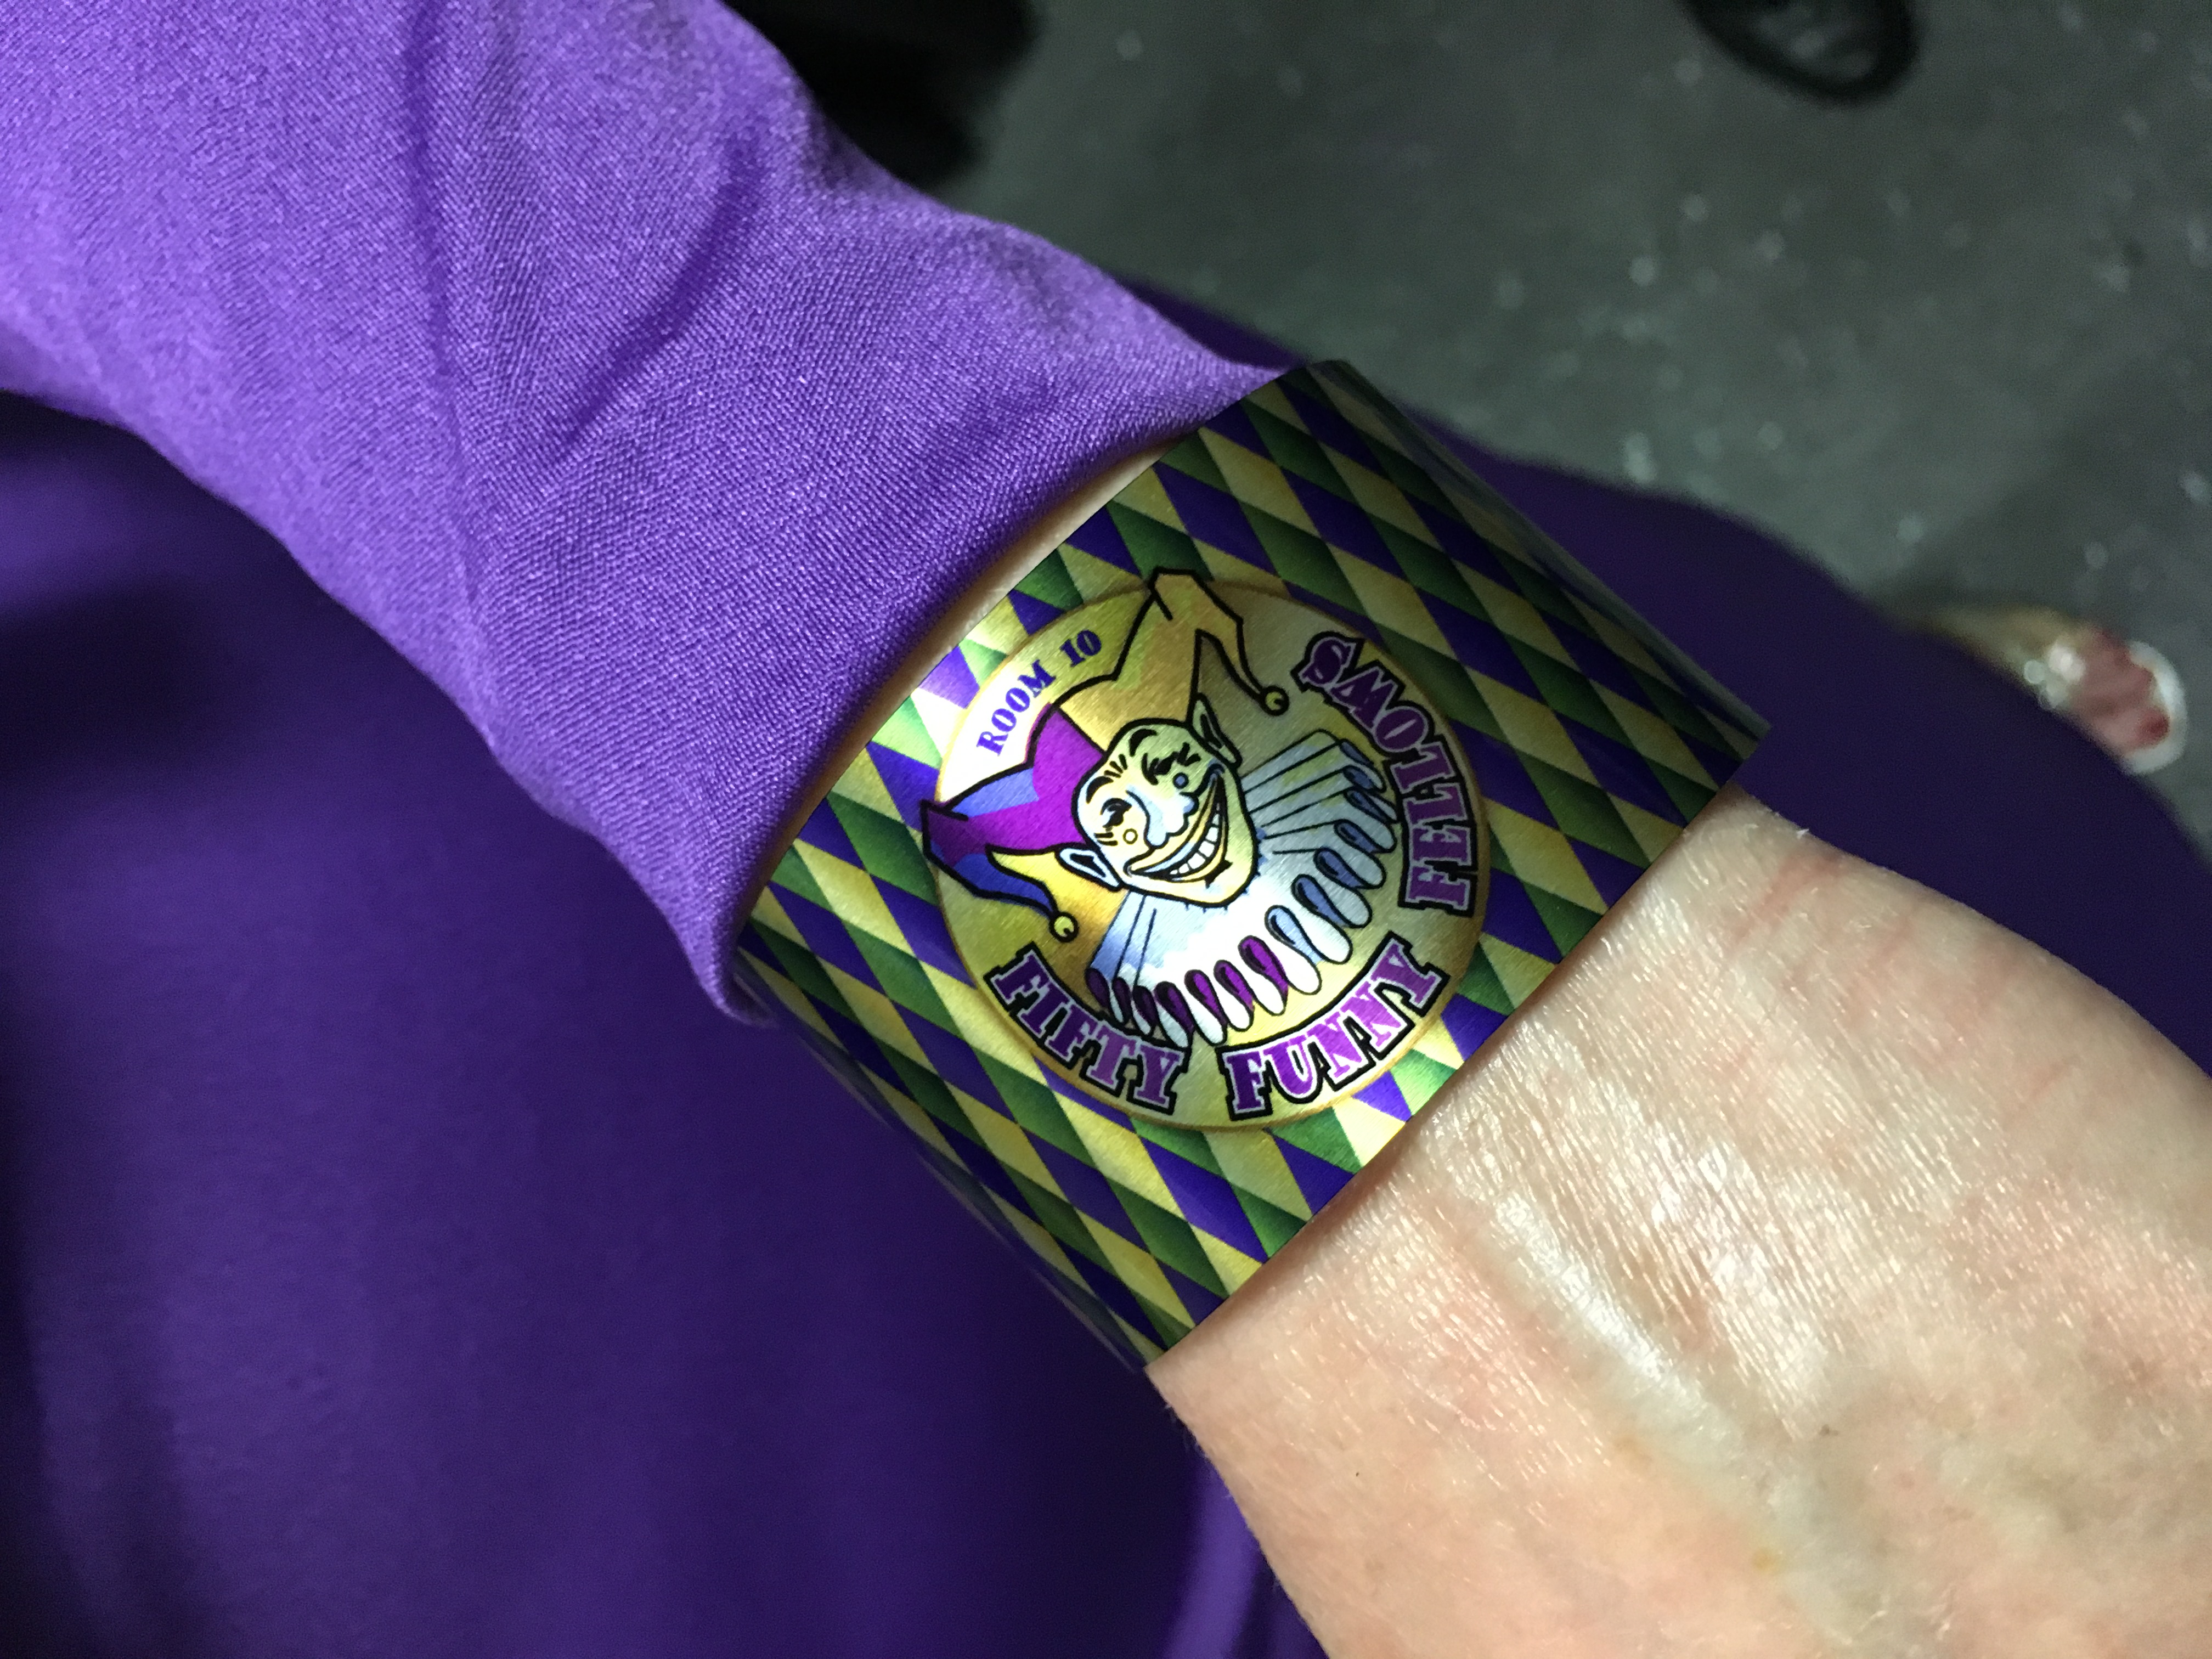 This lovely bracelet was made by David Gross for his wife Monica for their annual Mardi Gras Ba